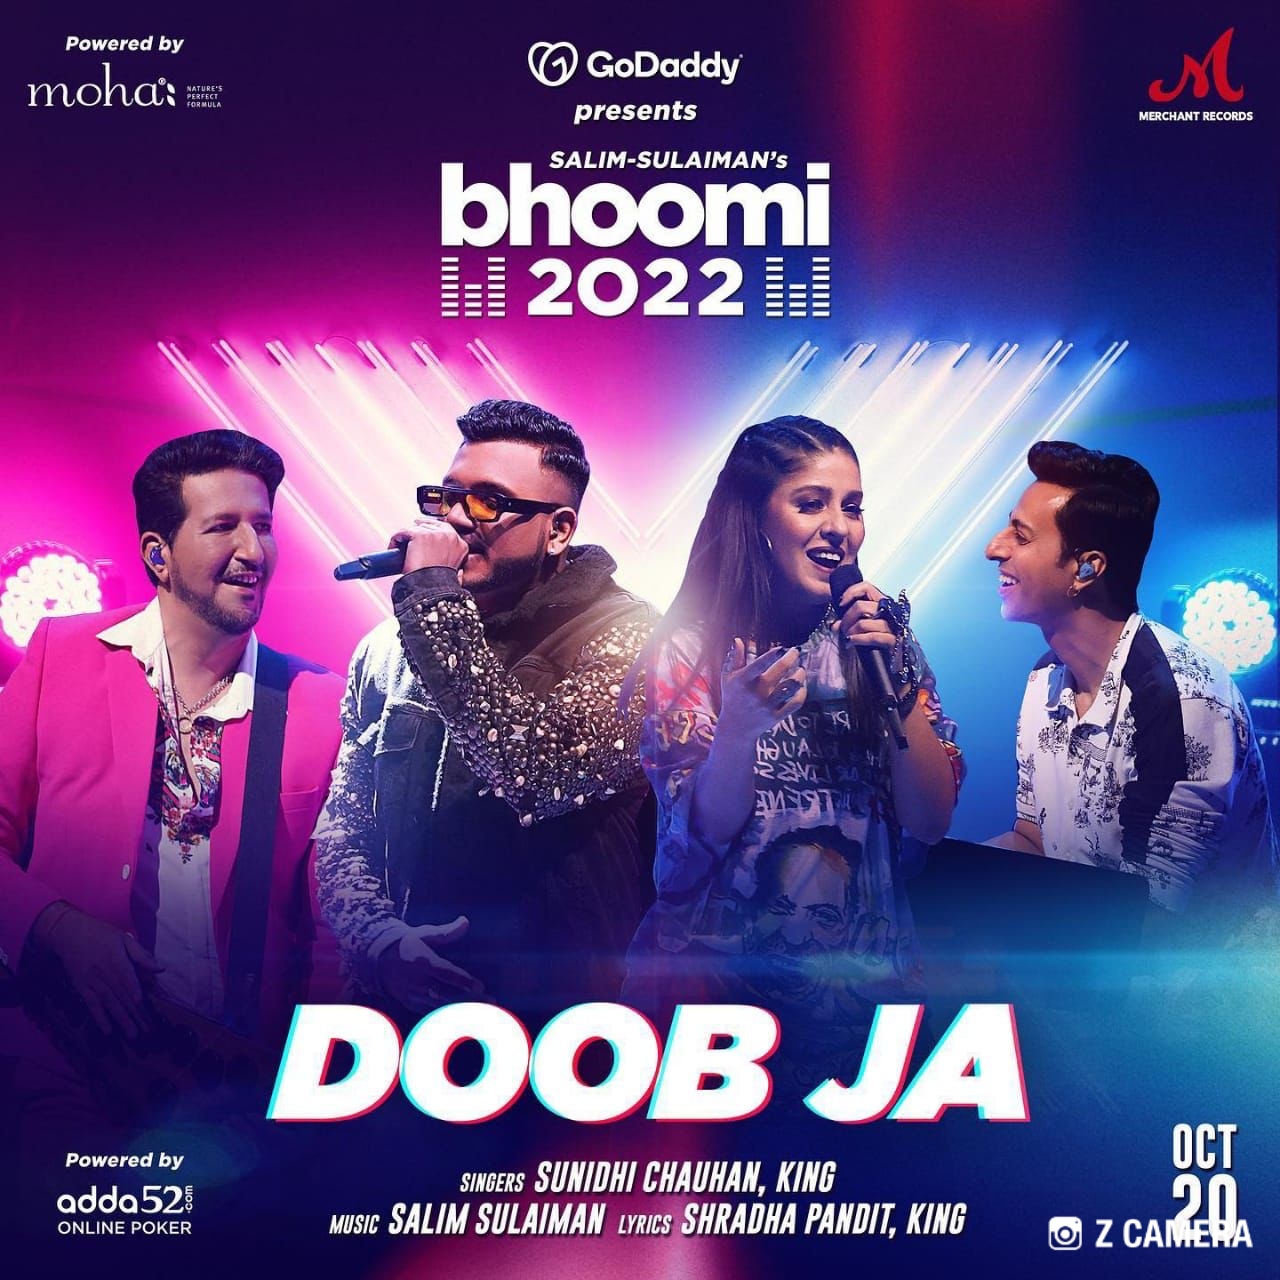 Music icons Salim-Sulaiman have released their second song 'Doob Ja' sung by Singer Sunidhi Chauhan and King from their album Bhoomi 22